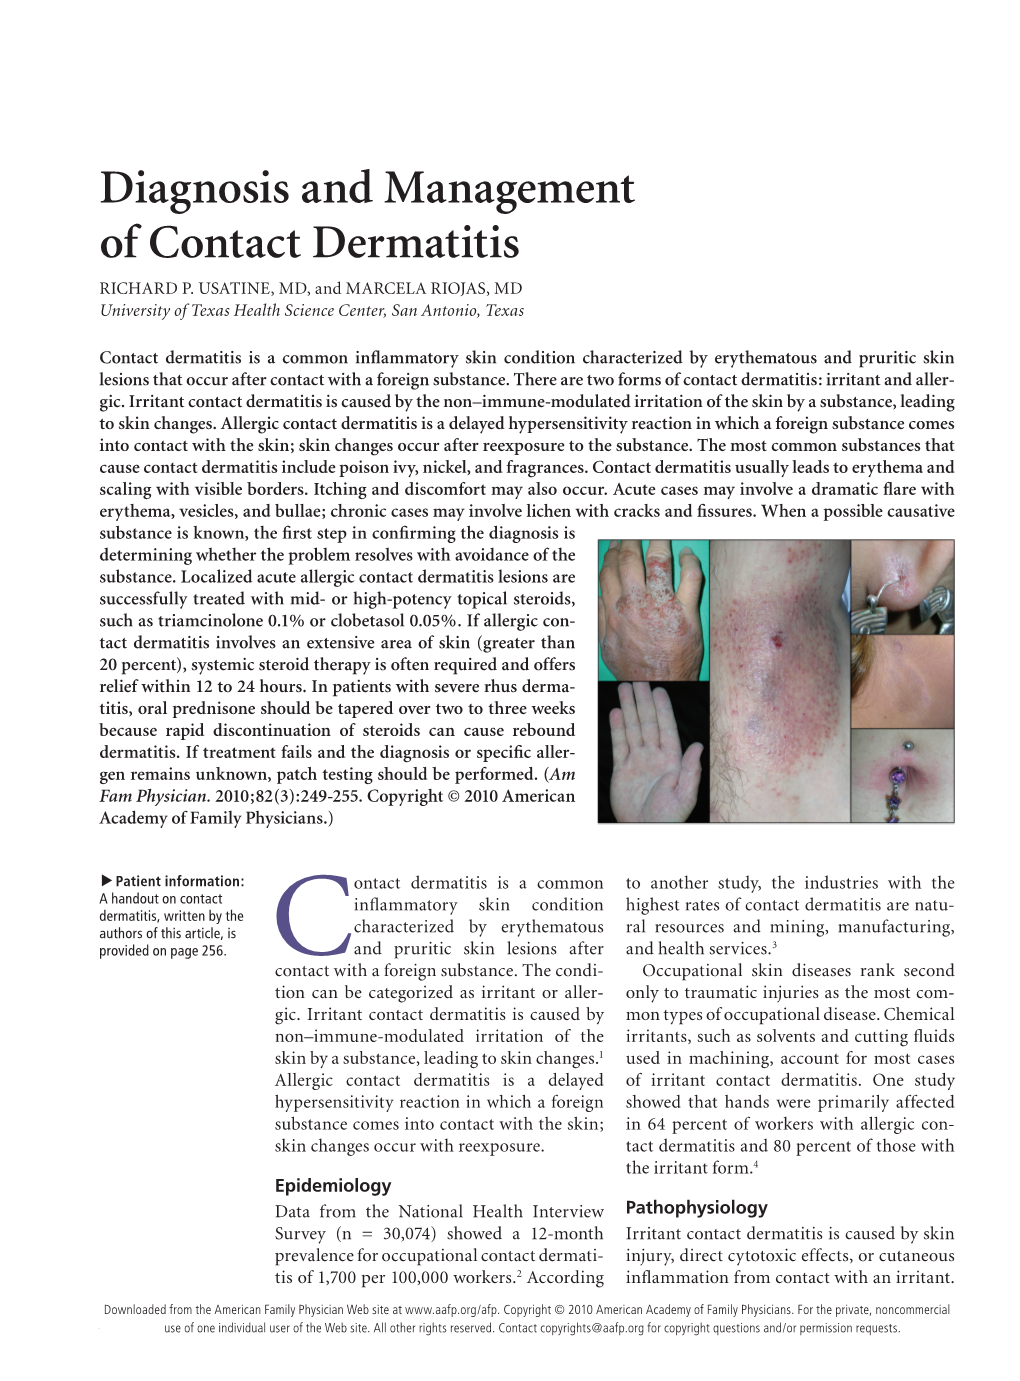 Diagnosis and Management of Contact Dermatitis RICHARD P